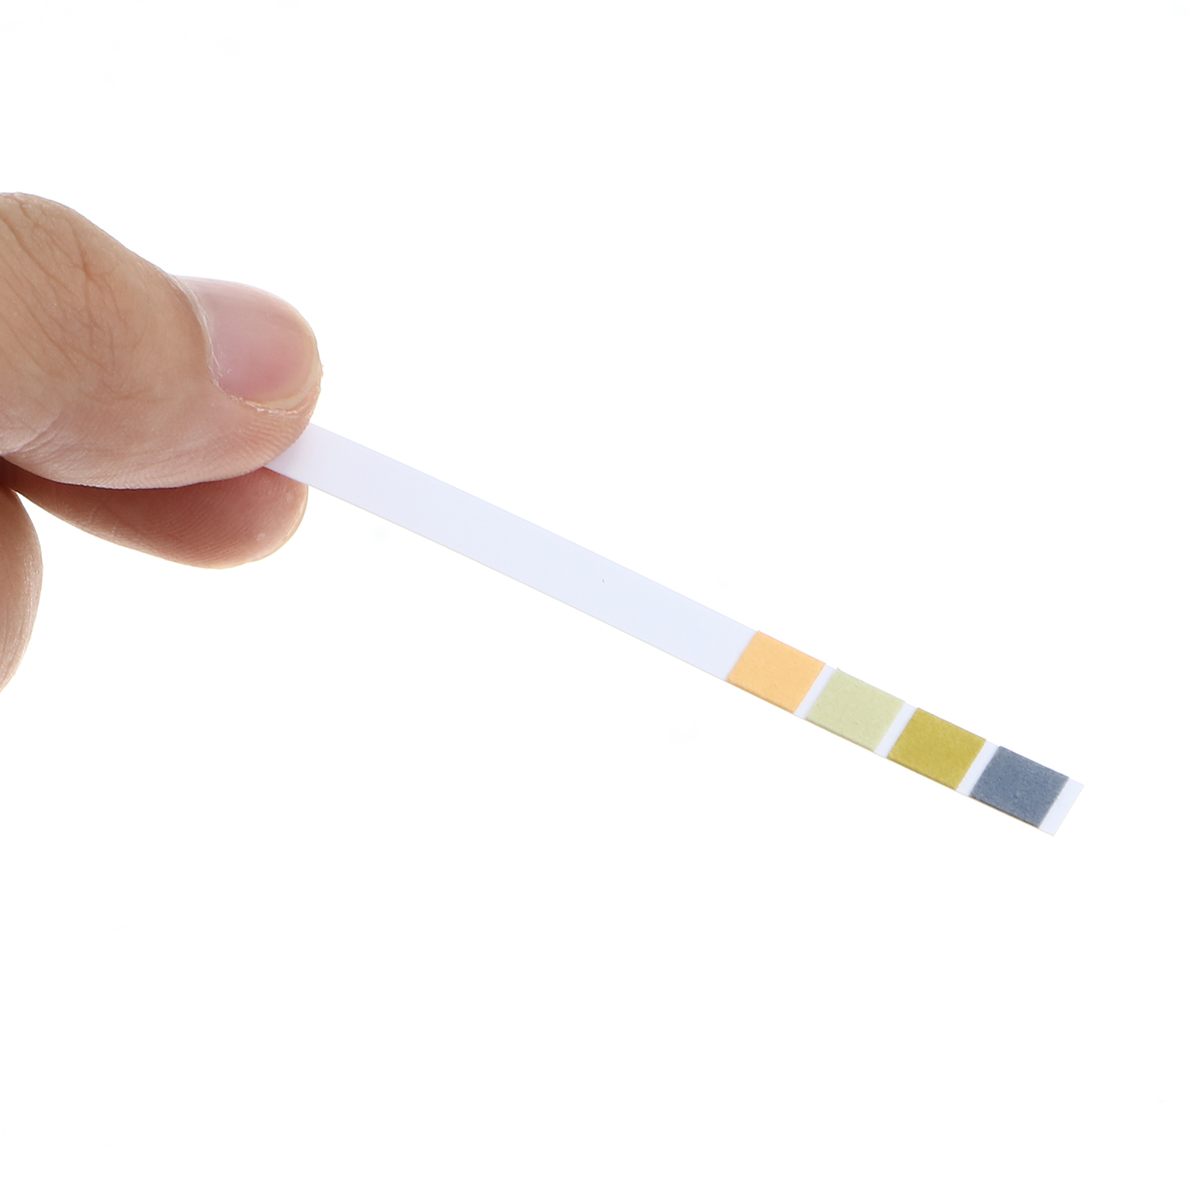 100PCSBox-PH-Test-Strips-Precision-Four-color-Comparison-0-14-PH-Measuring-Drinking-Water-Quality-St-1745548-10